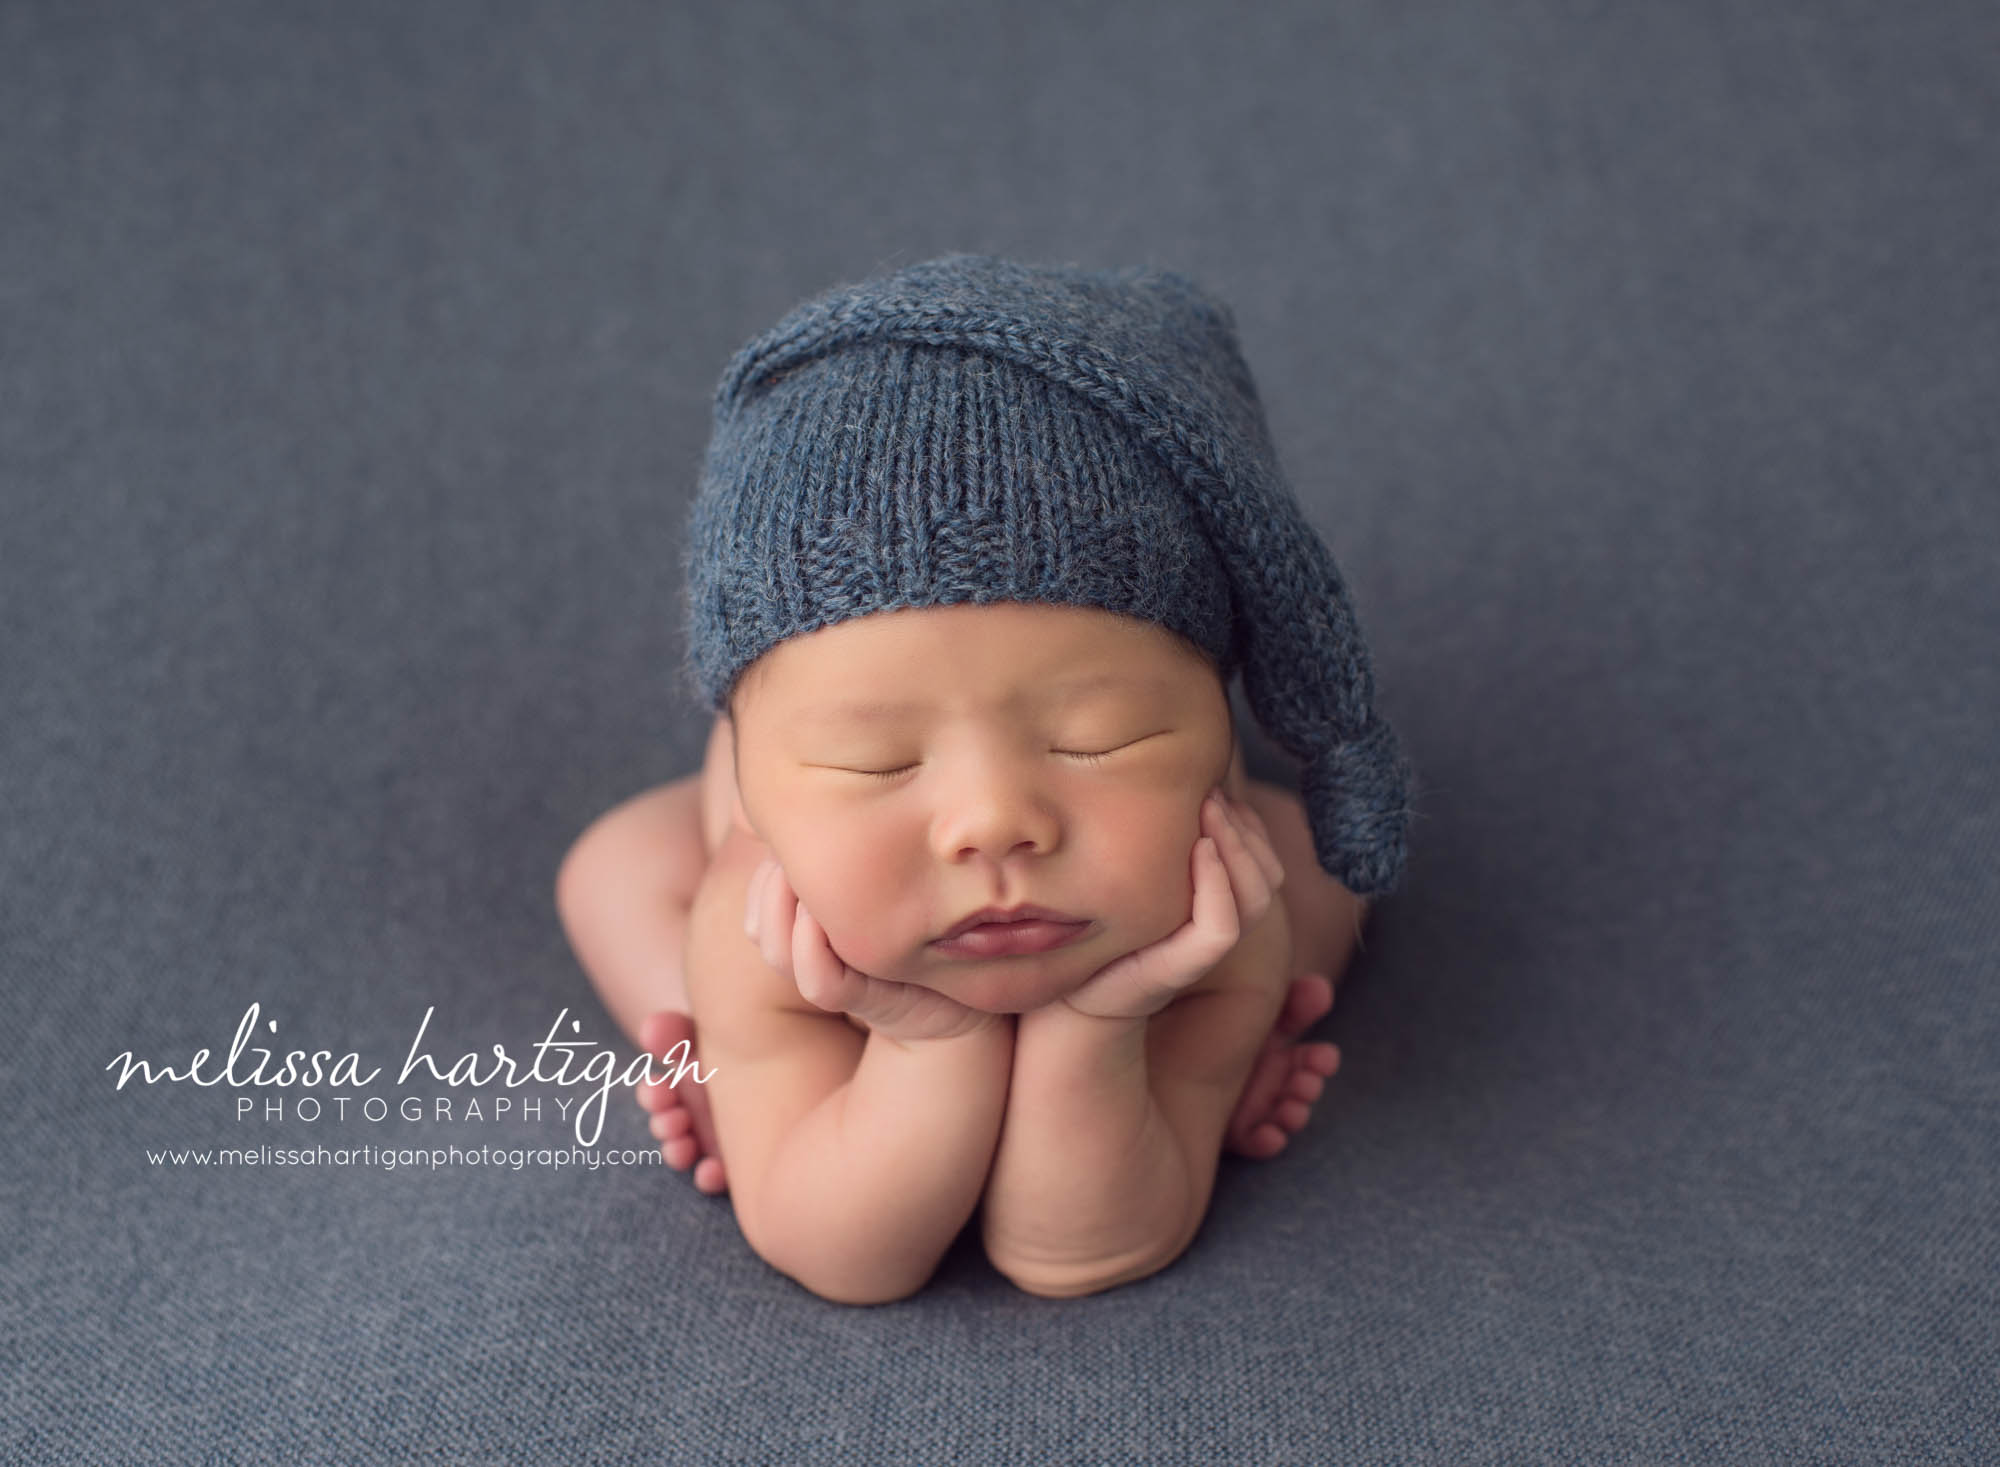 Melissa Hartigan Photography Maternity and Newborn Connecticut Photographer Lucas Newborn Session Baby boy in froggy pose wearing blue knit hat on blue blanket